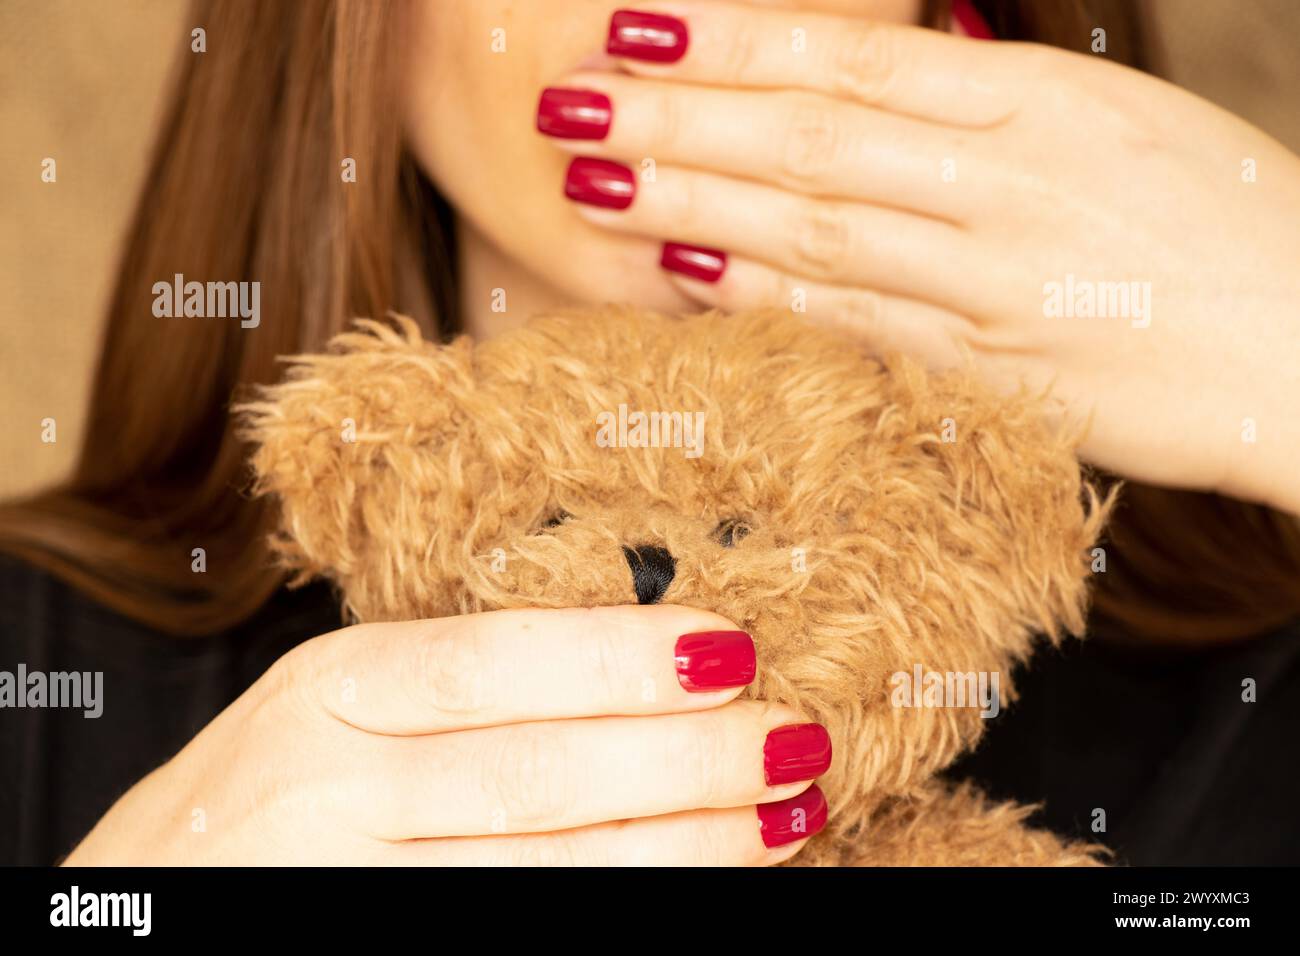 The girl covers her mouth and covers the mouth of a teddy bear, a secret , you can t tell Stock Photo